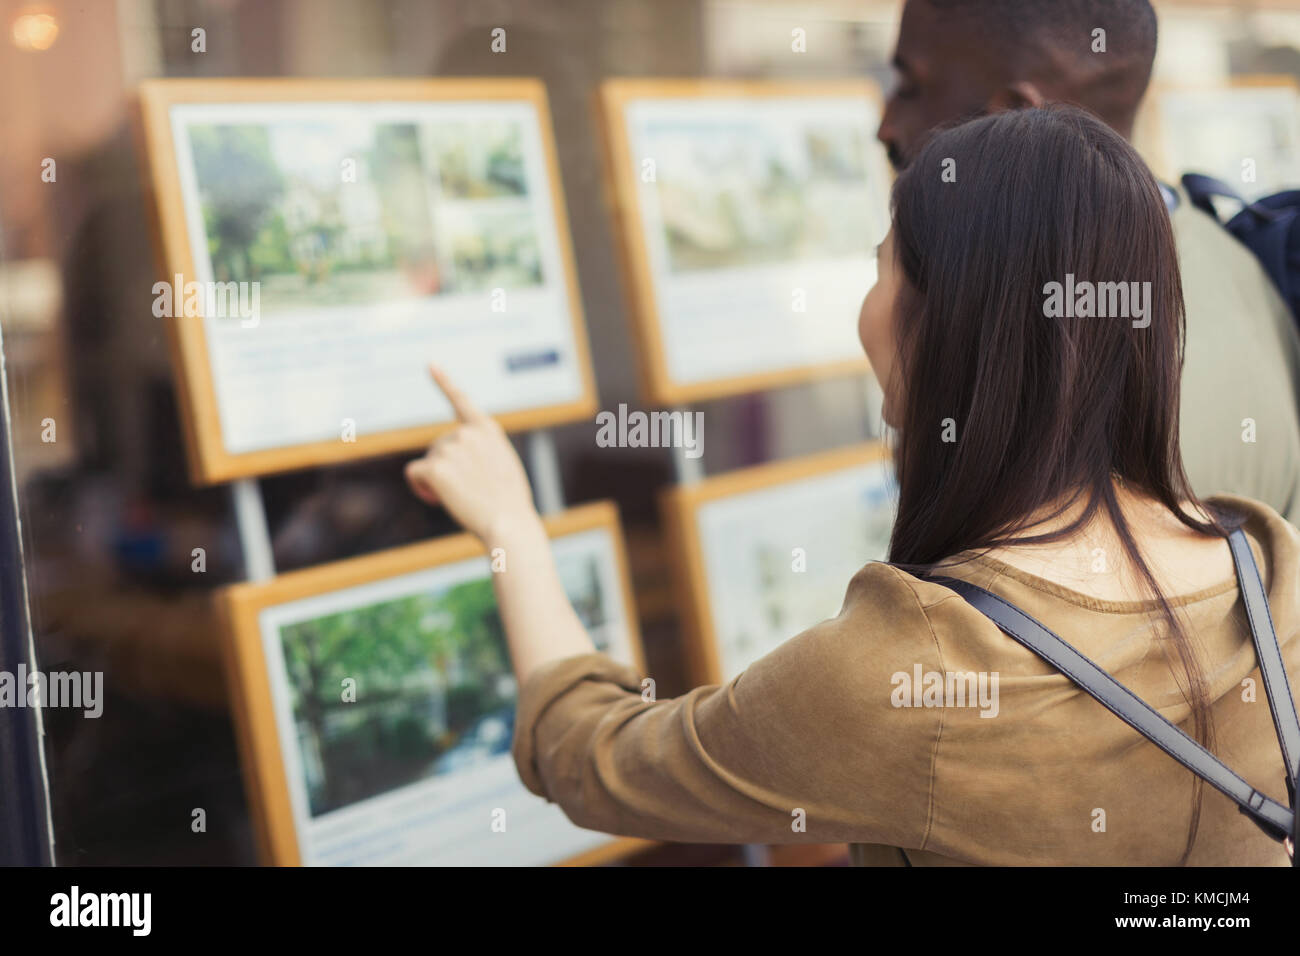 Young couple browsing real estate listings at storefront Stock Photo